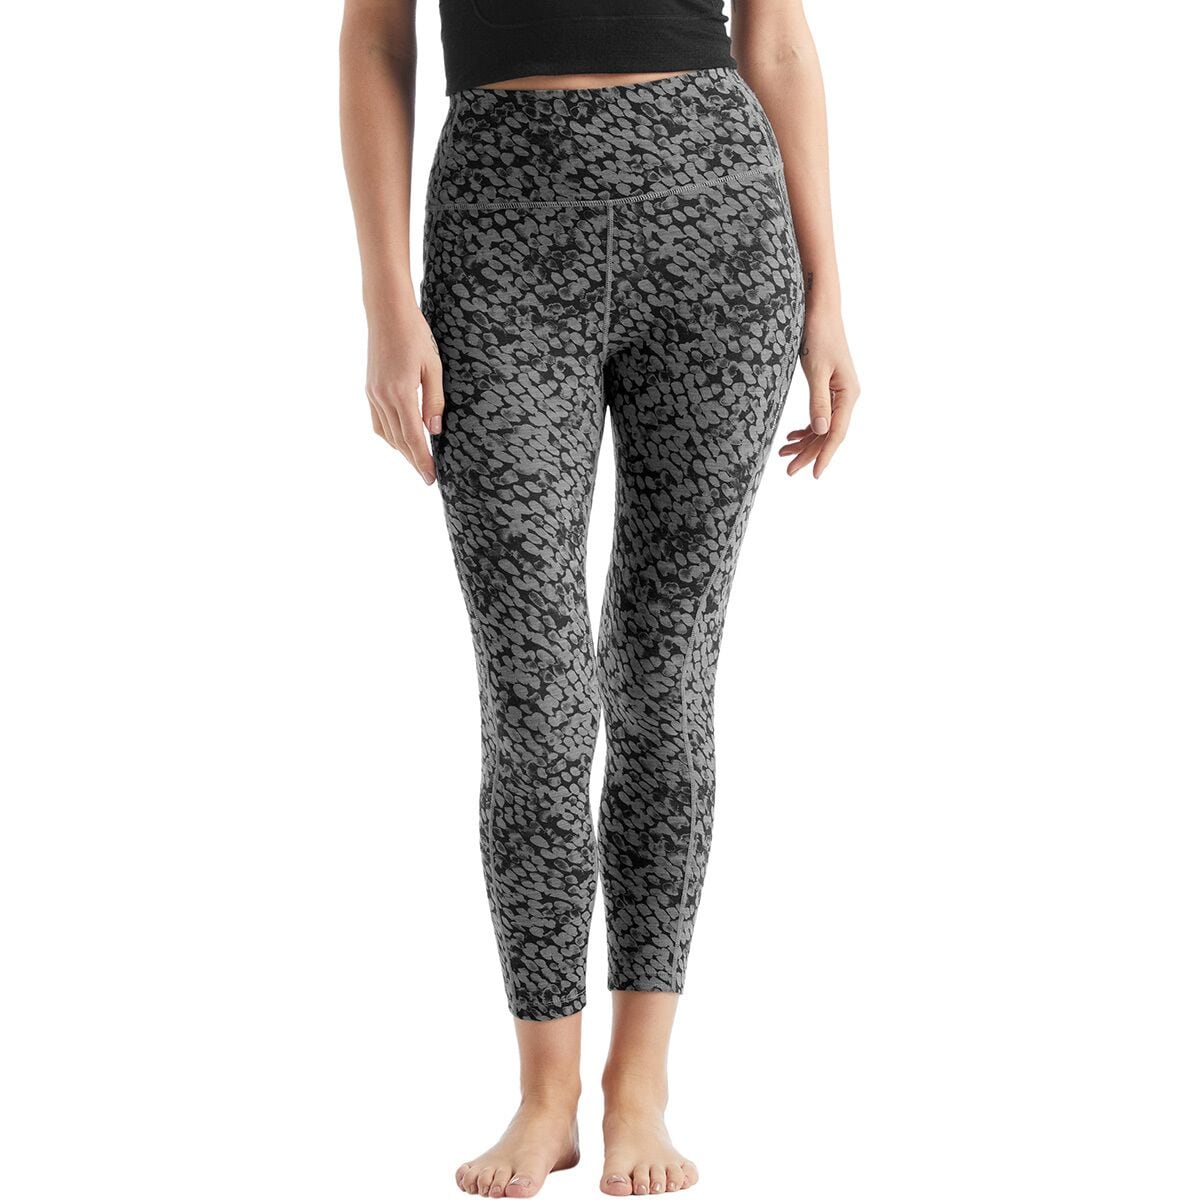 Fastray High Rise Forest Shadows Tight - Women